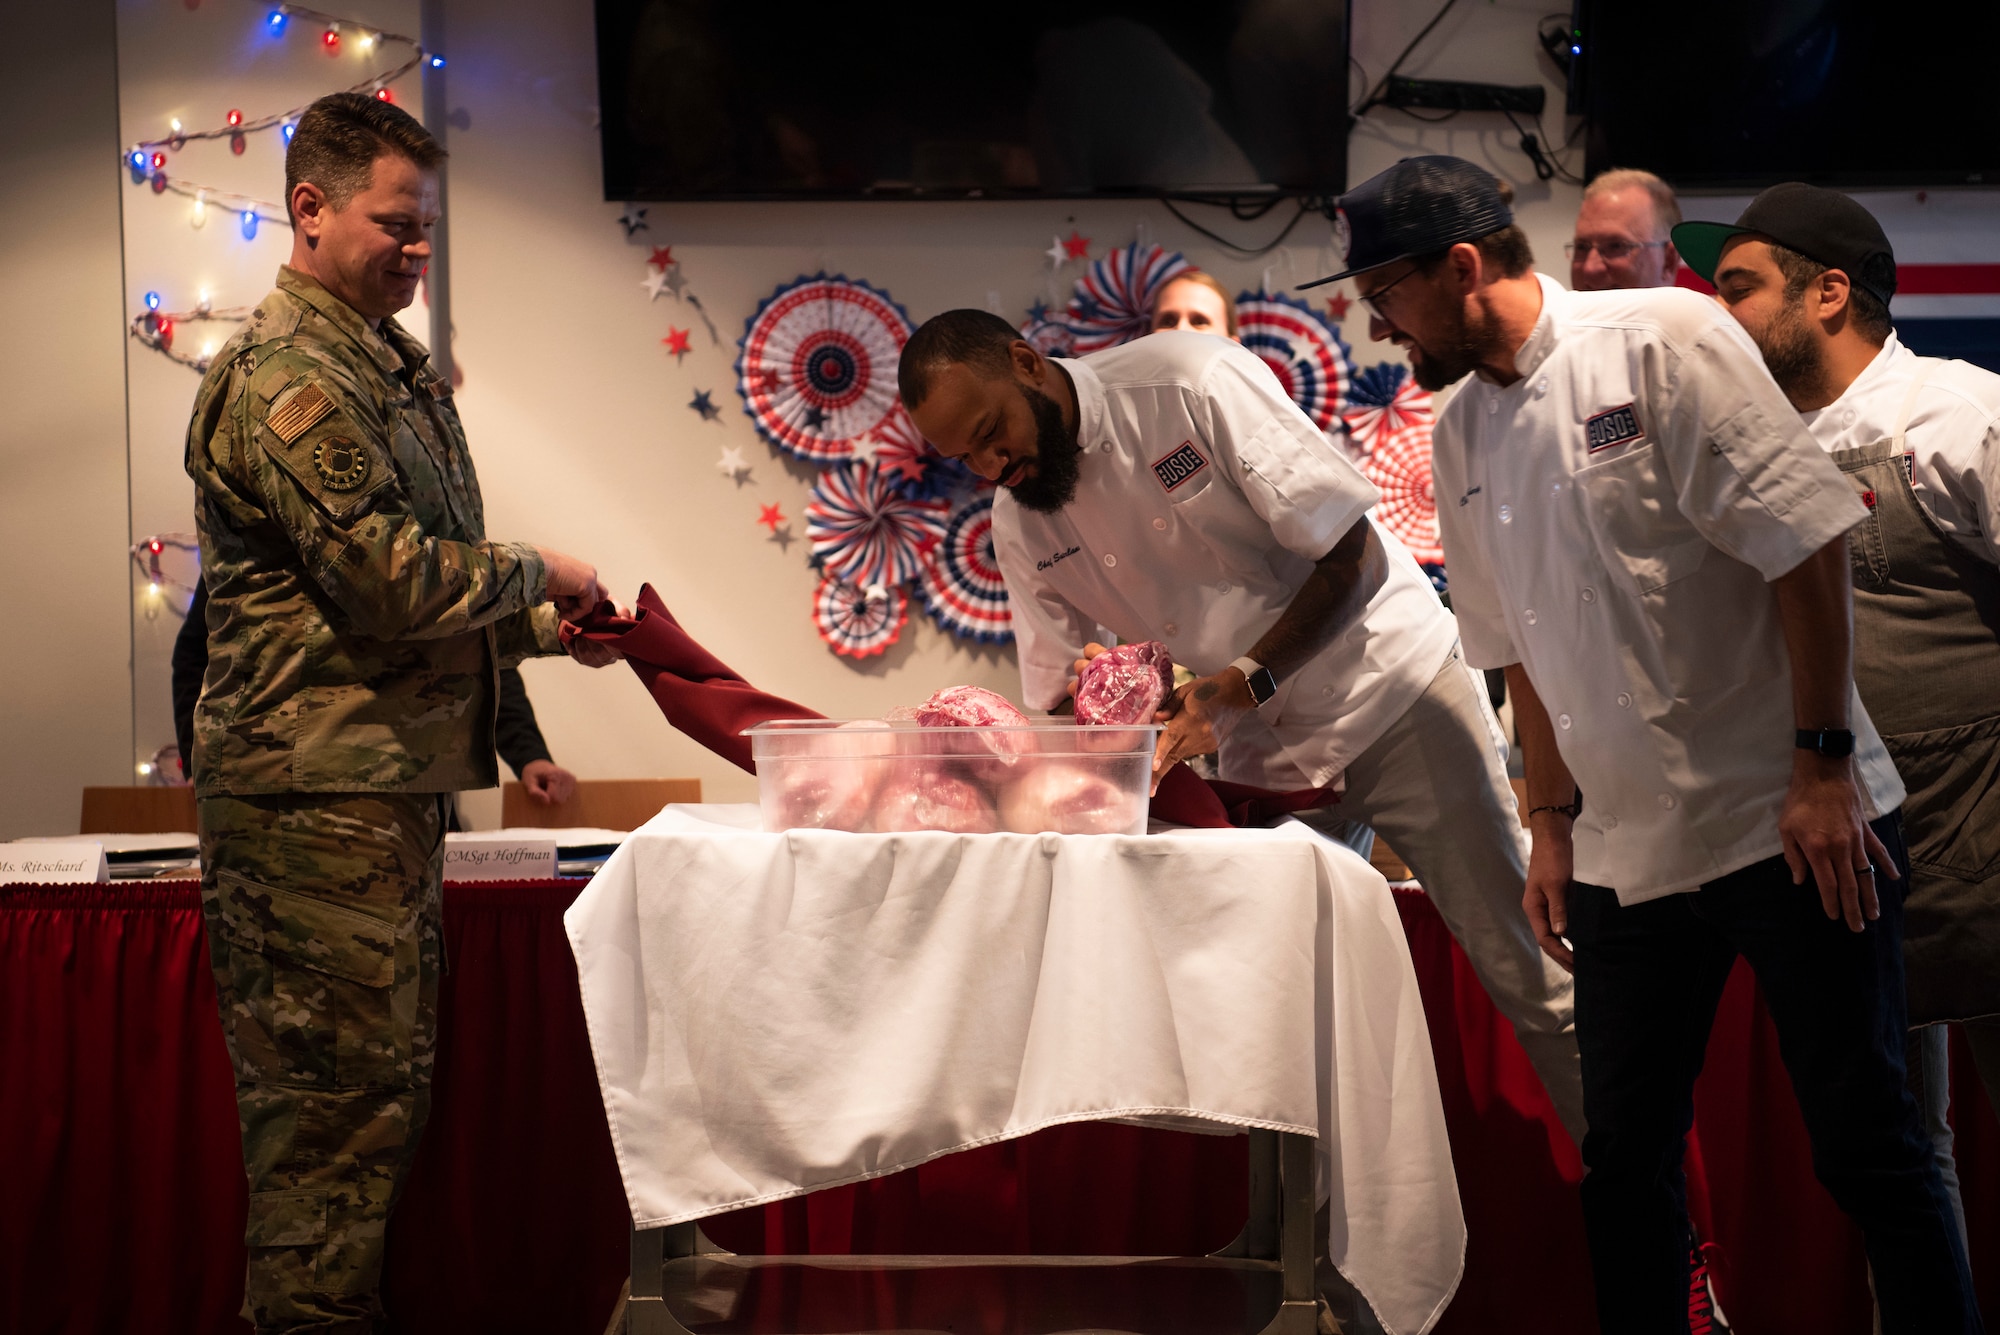 Colonel Peter Bonetti, 90th Missile Wing commander, uncovers the mystery ingredient, lamb, as the celebrity chef mentors looks on, before the chef competition begins Oct. 15, 2019, at F.E. Warren Air Force Base, Wyo. The USO partnered with three chefs from Bravo’s season 16 “Top Chef” to bring morale on military instillations and hold cooking competitions. (U.S. Air Force photo by Senior Airman Abbigayle Williams)